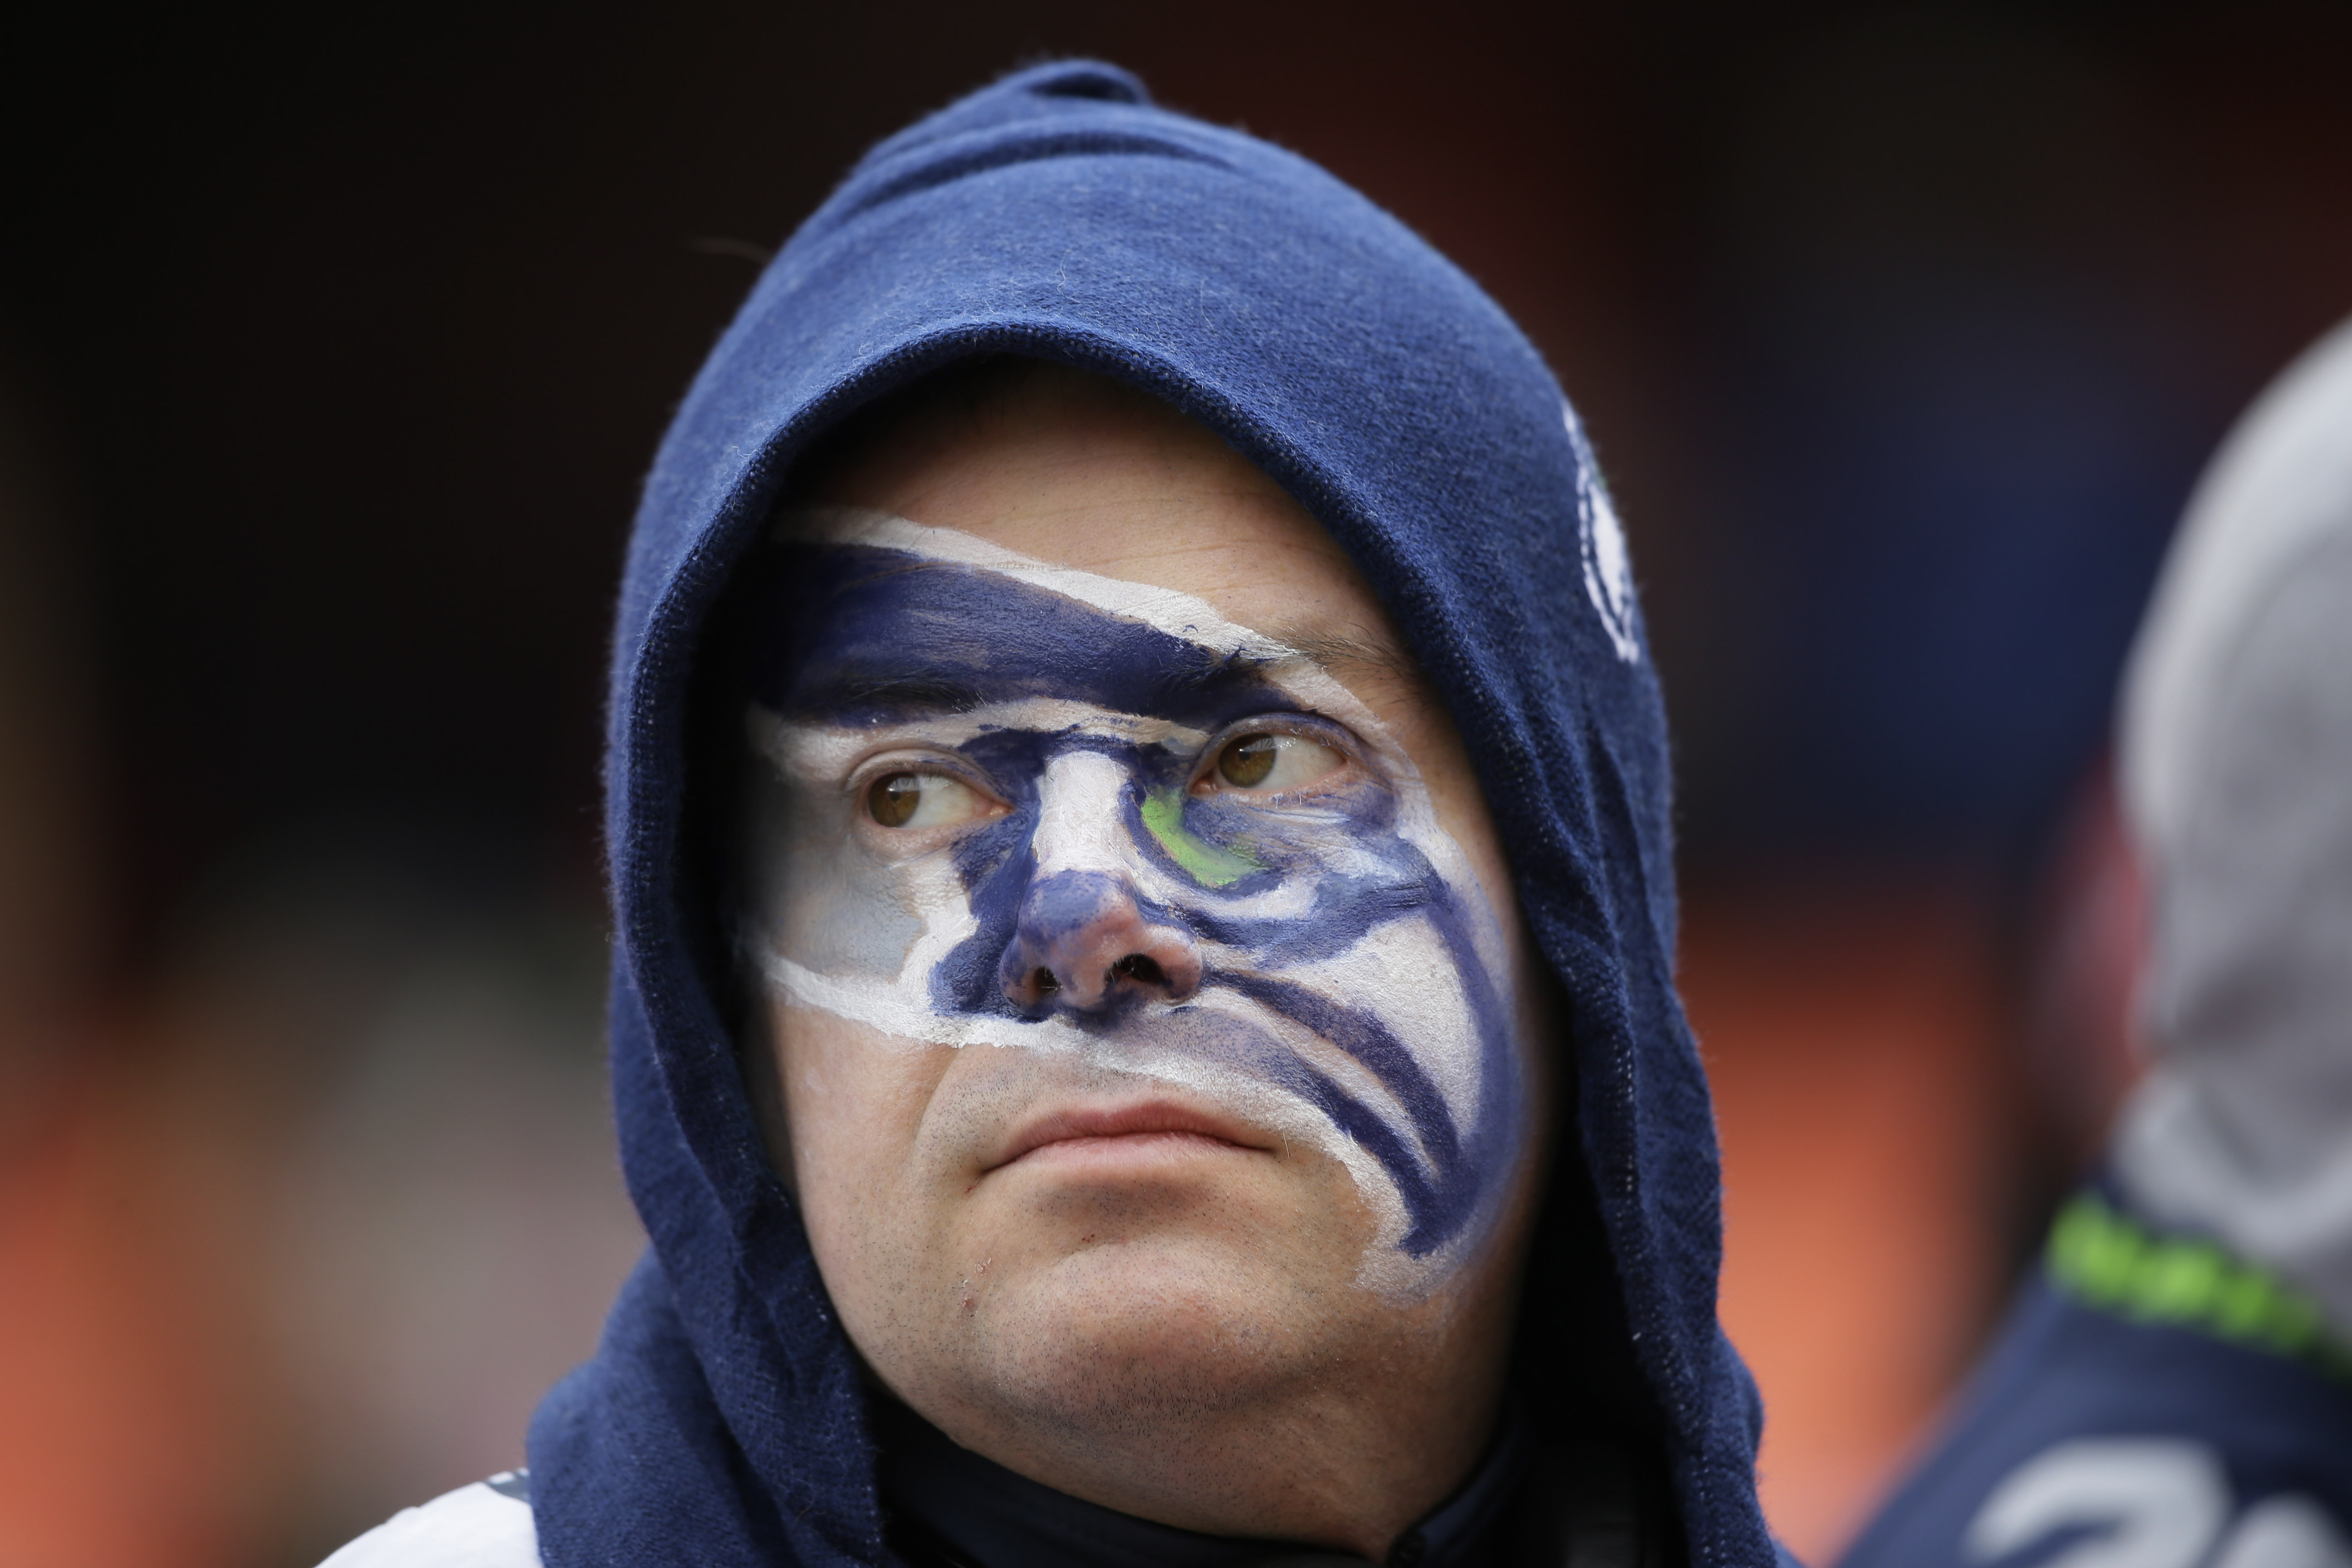 To inspire you — a Seattle Seahawks fan wears the team logo before the game against the Kansas City Chiefs in Kansas City on Nov. 16. The Associated Press